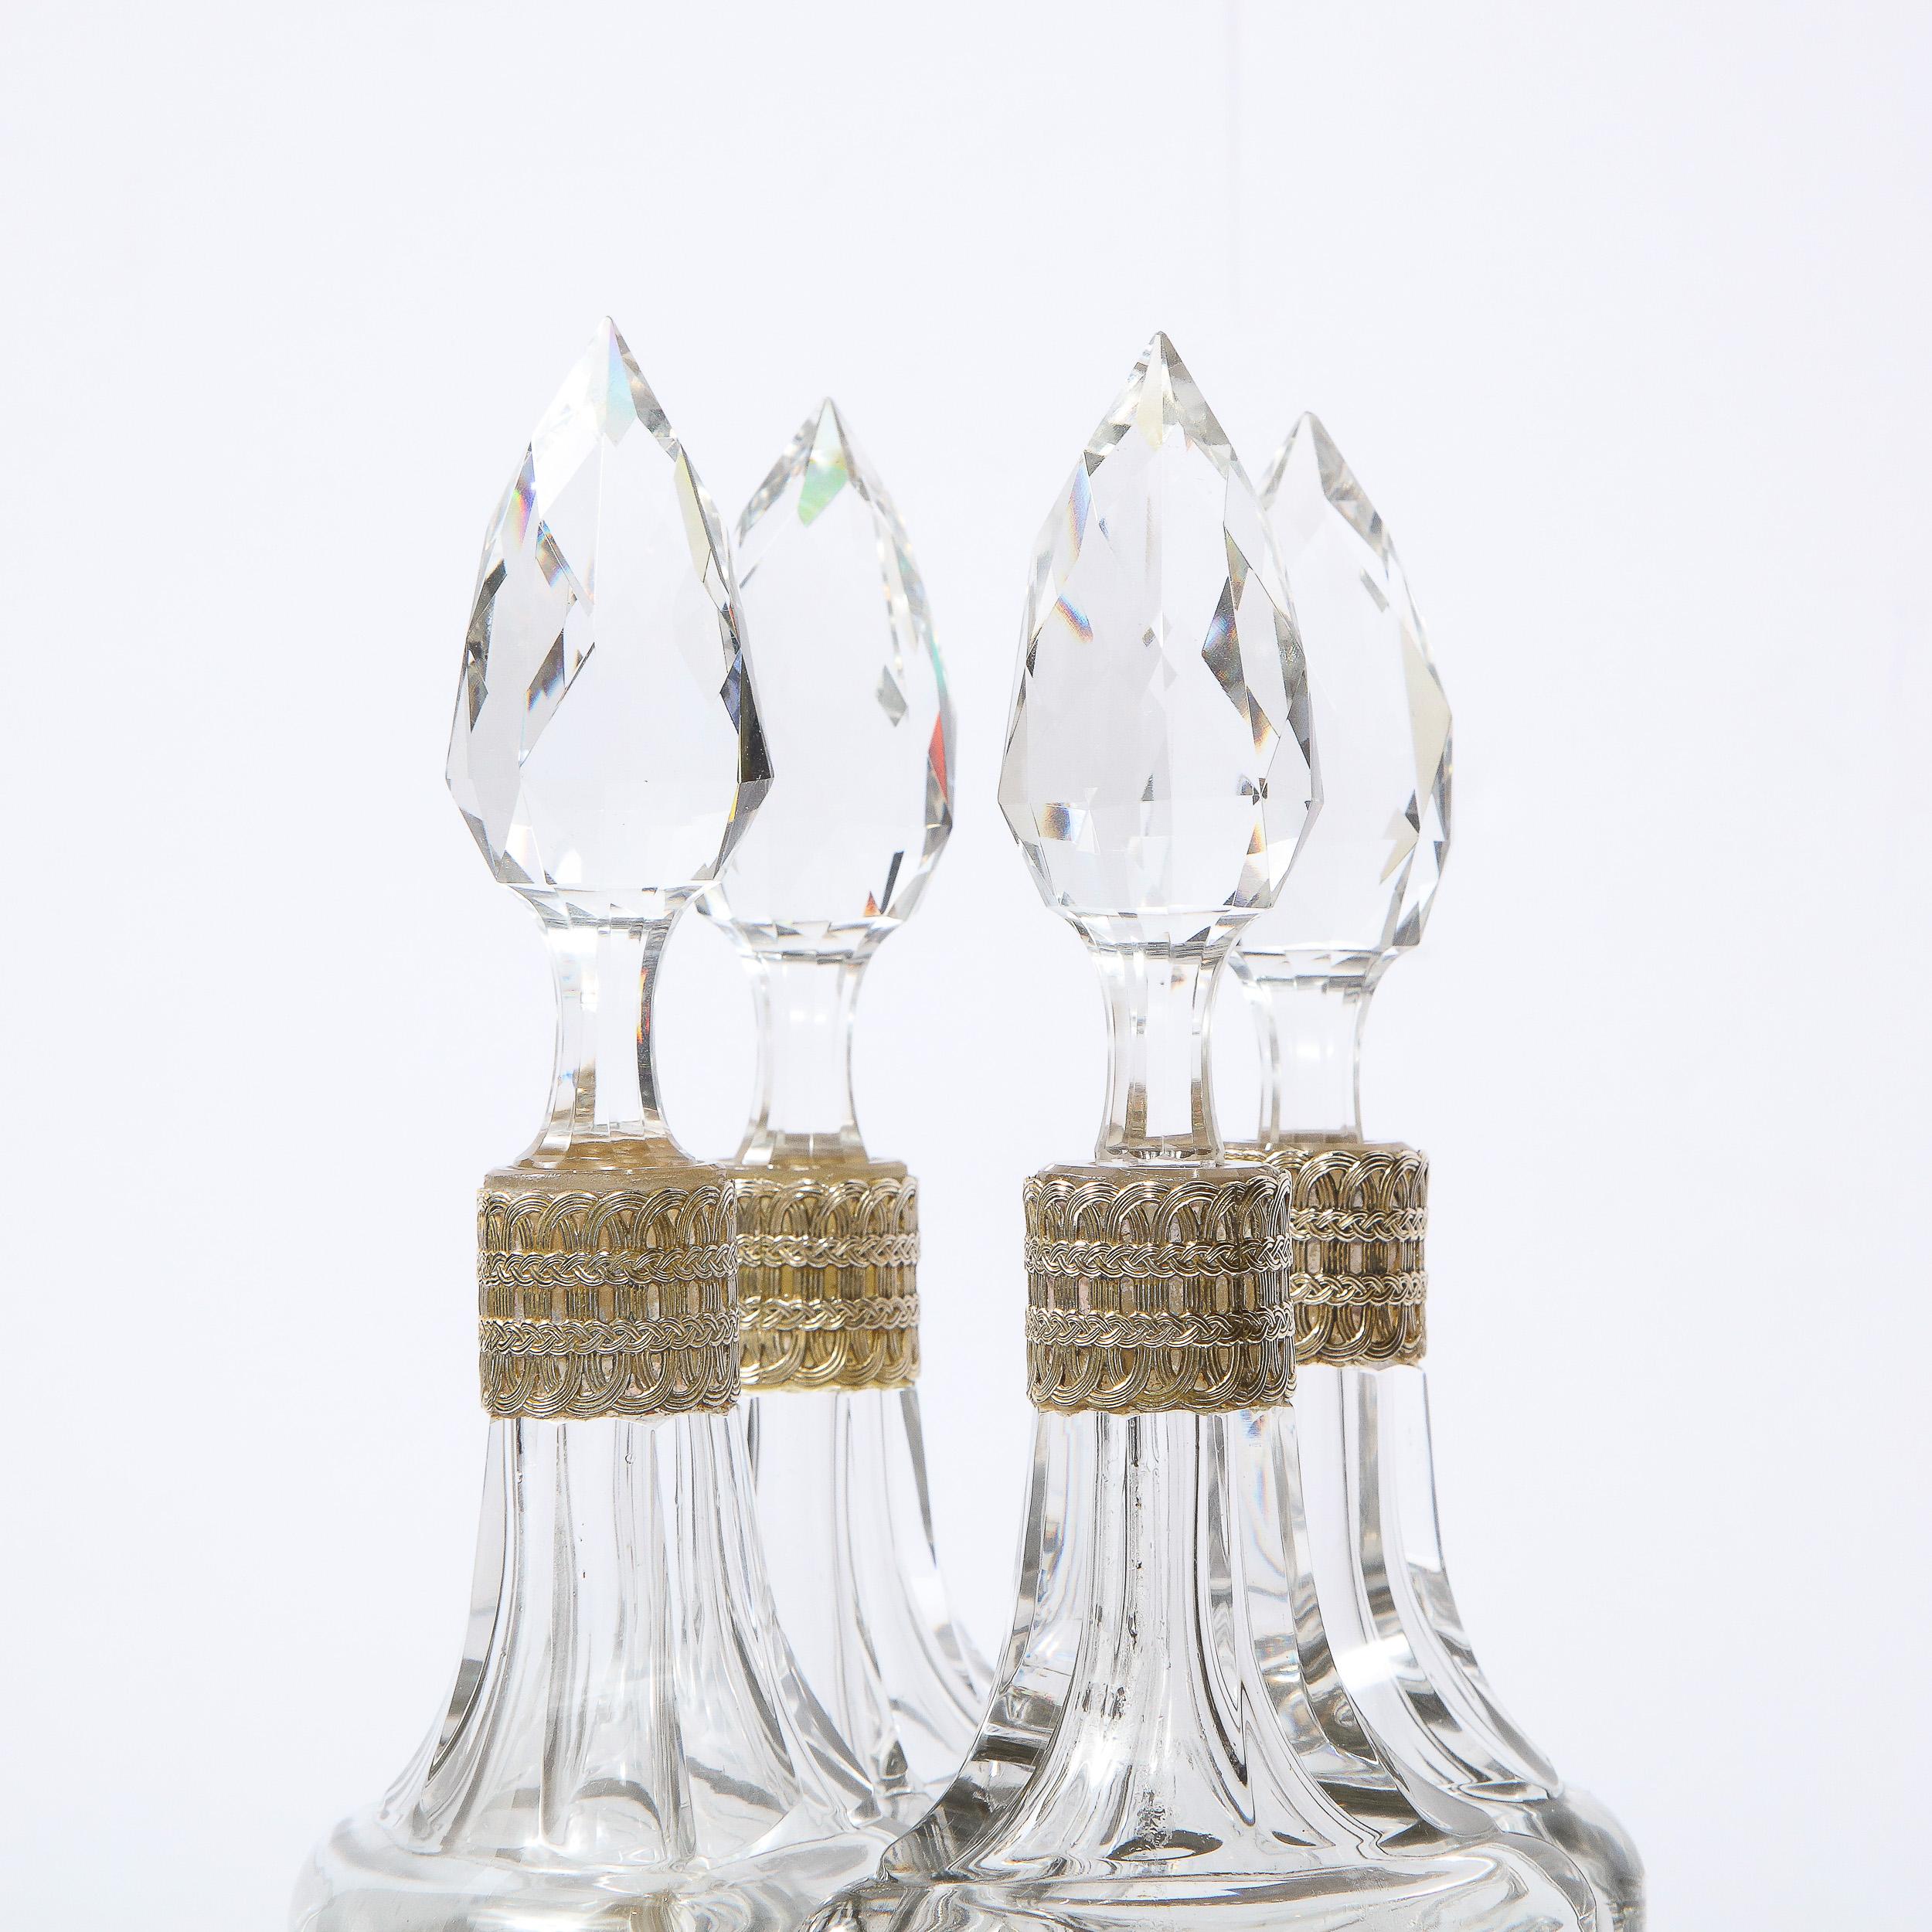 19th Century Neoclassical Figurative Silver Plate & Cut Crystal Decanter Set In Good Condition For Sale In New York, NY